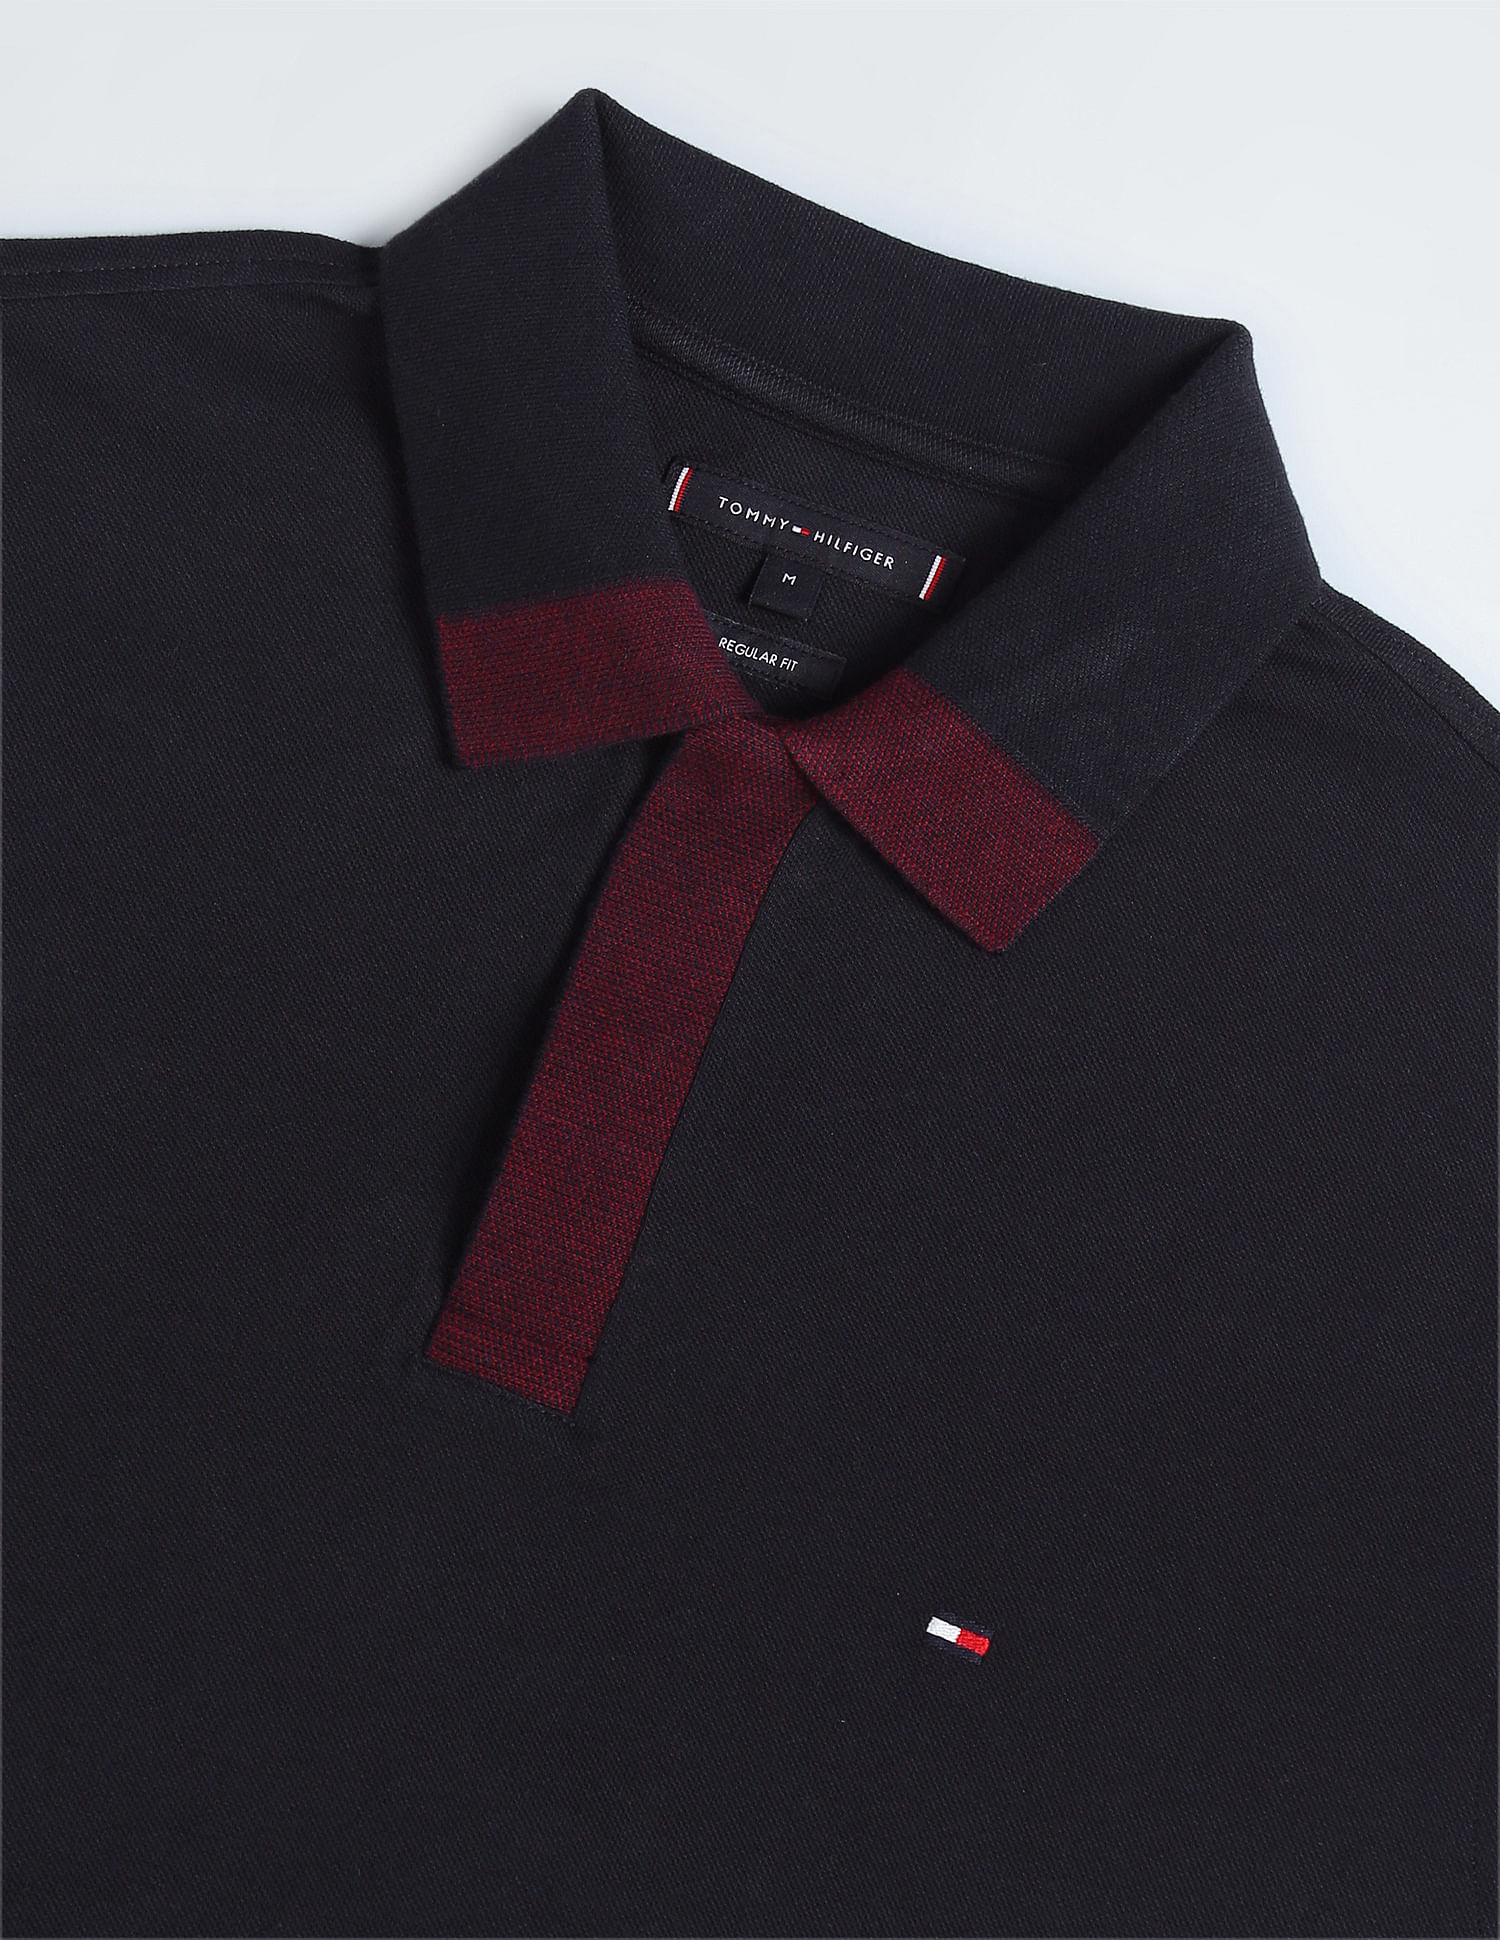 Buy Polo Placement Cotton Organic Hilfiger Tommy Shirt Mouline